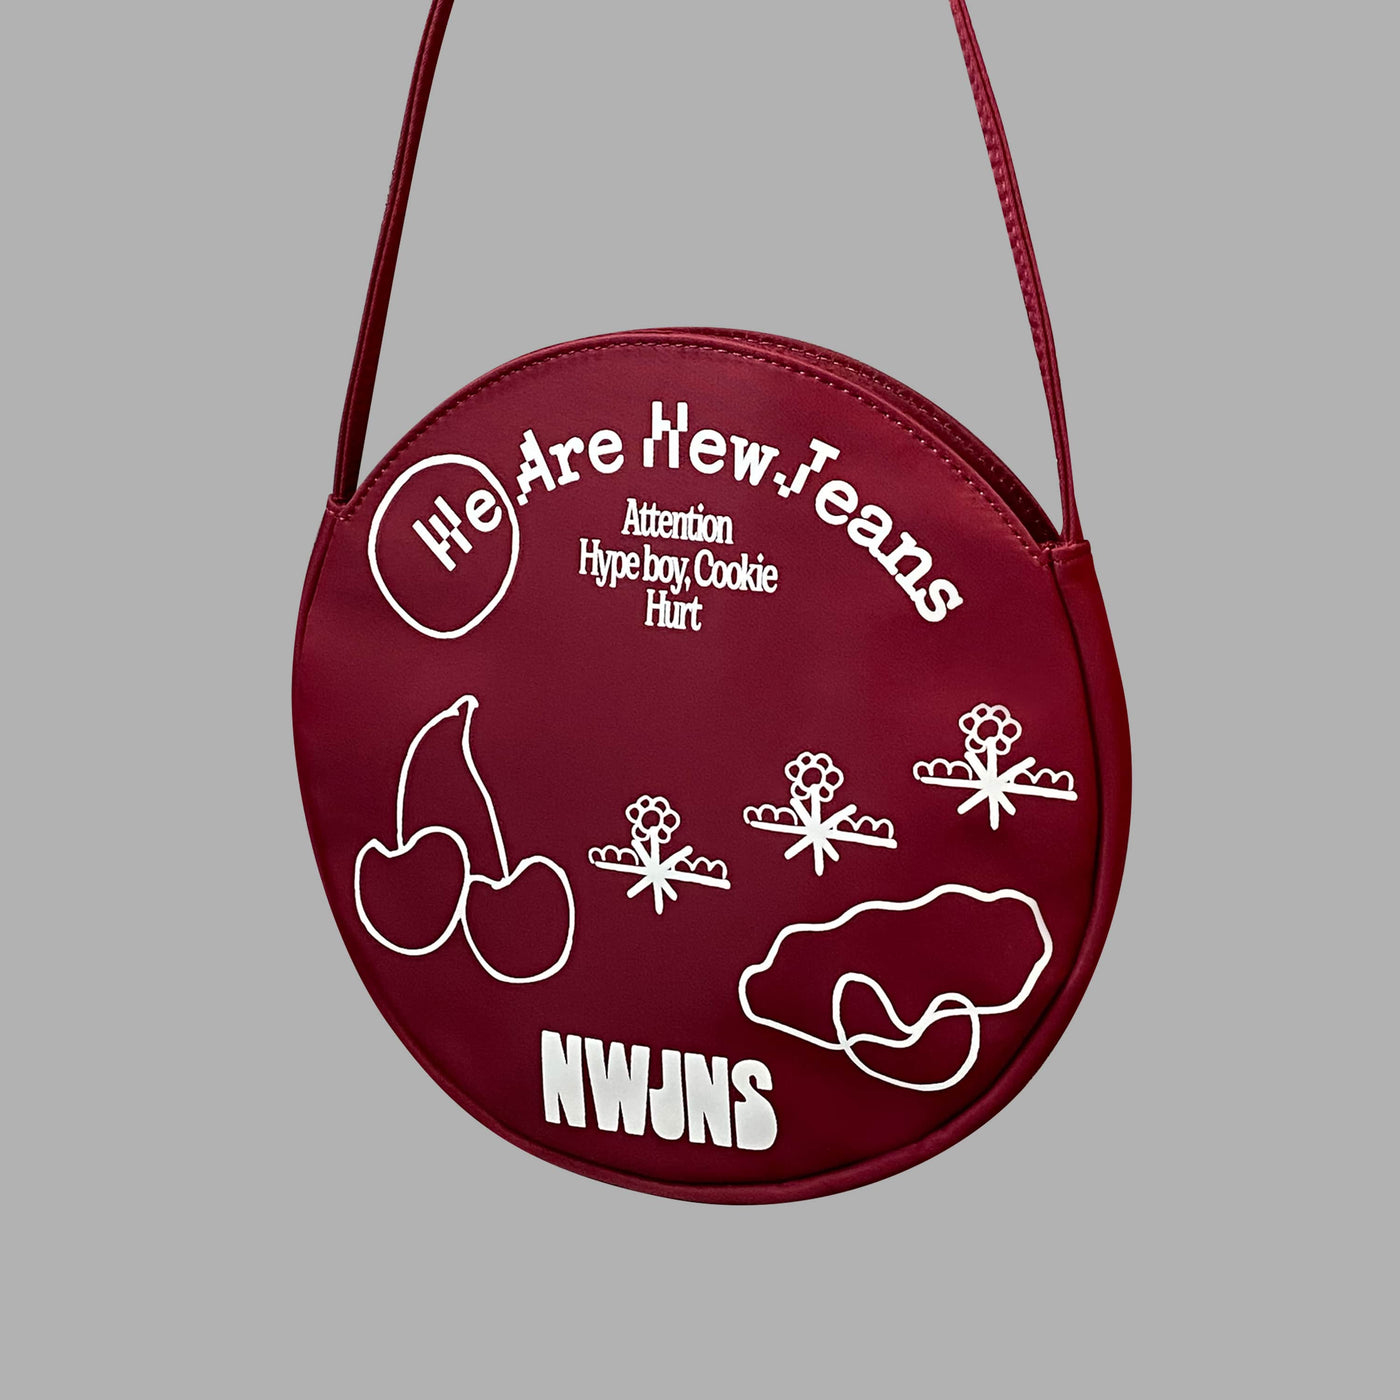 NewJeans 1st EP 'New Jeans' Bag [Limited Edition] 🇰🇷